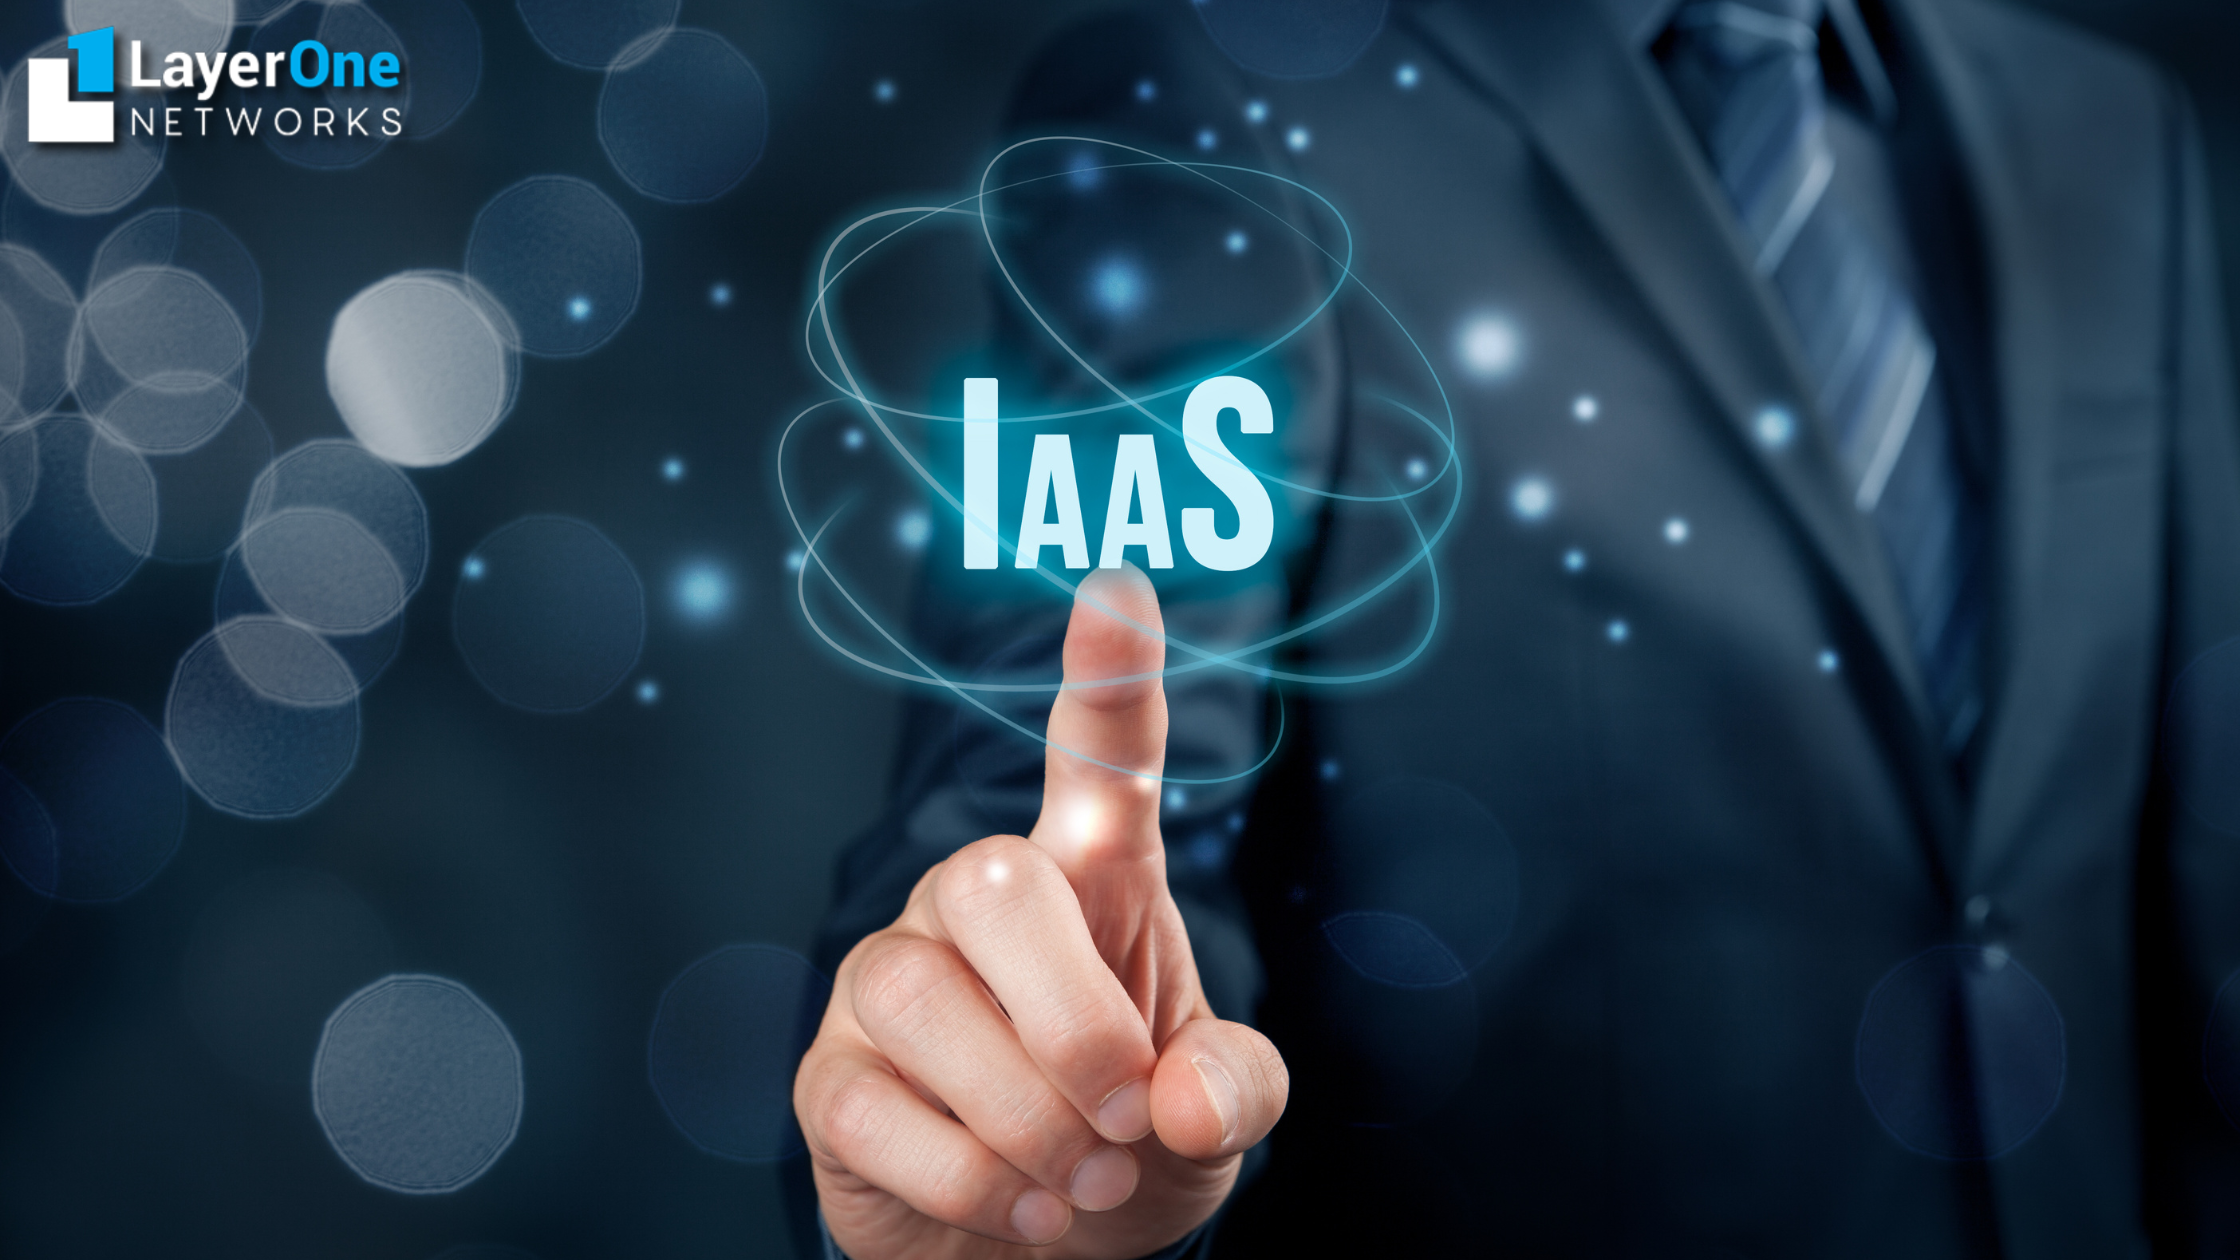 Infrastructure as a Service(IaaS)